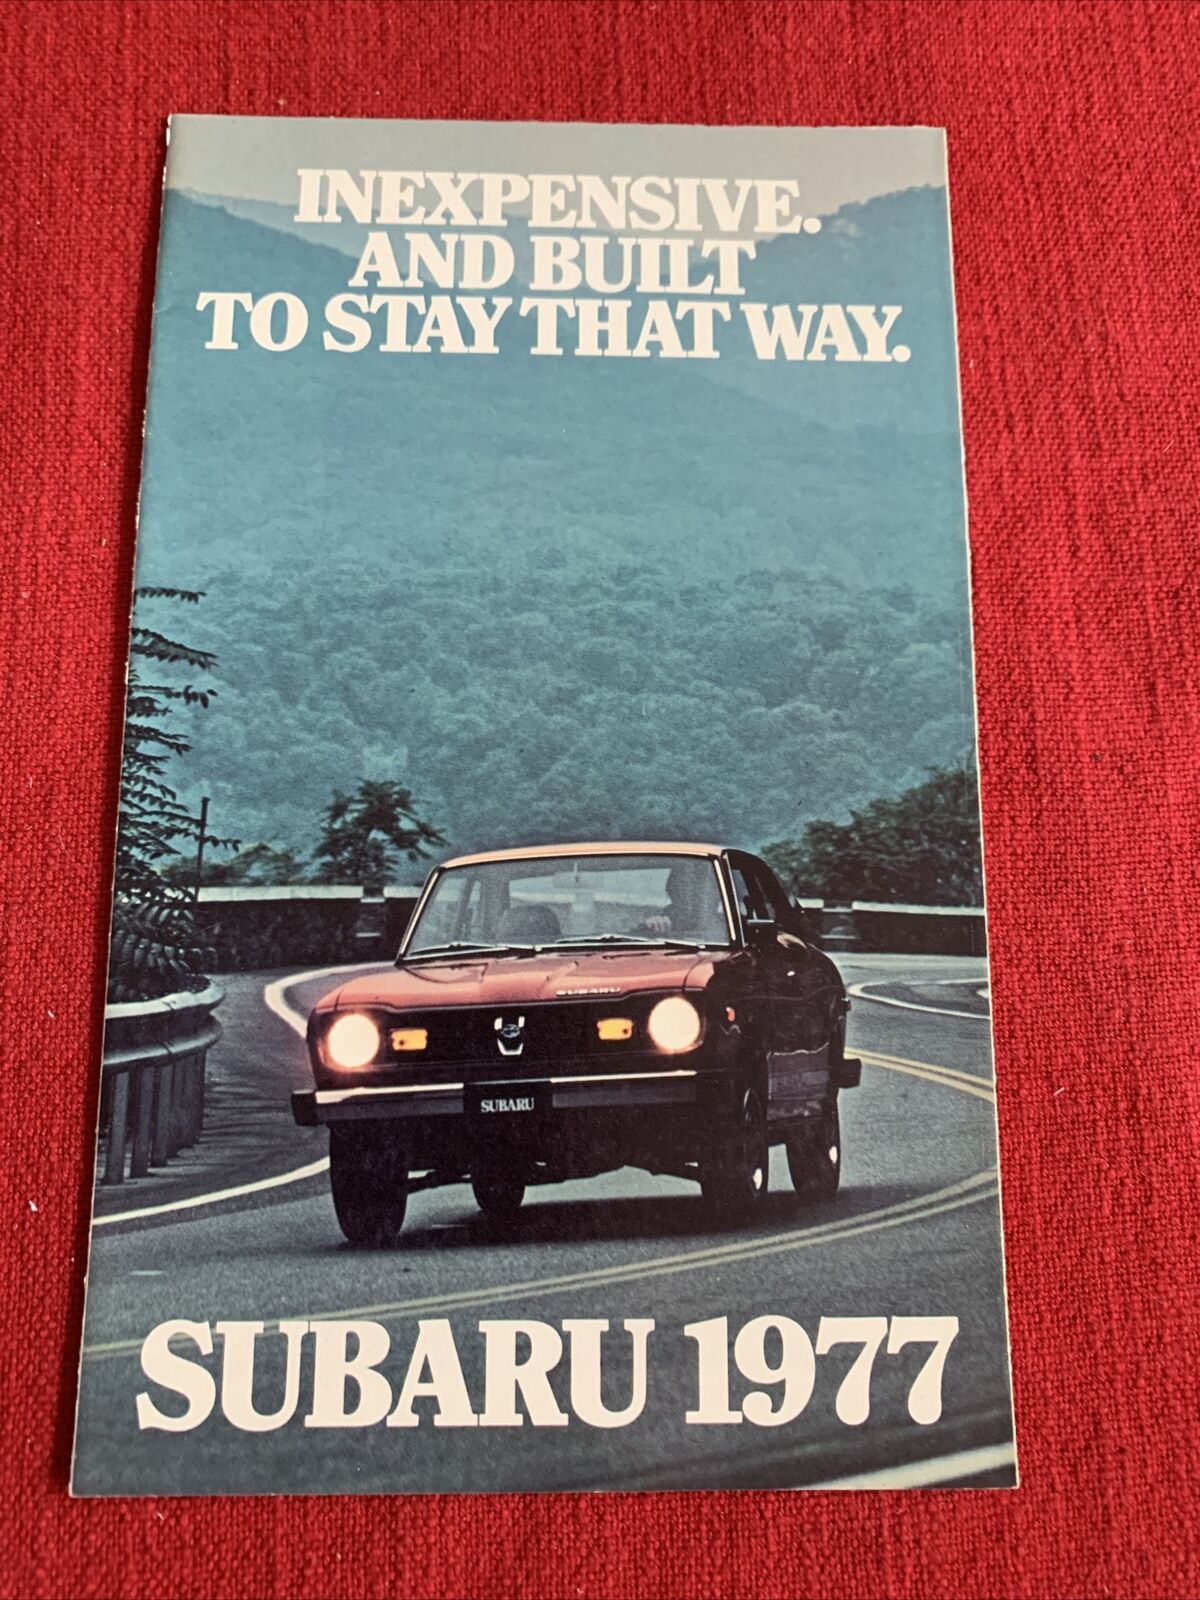 ORIGINAL VINTAGE BROCHURE SUBARU 1977 INEXPENSIVE AND BUILT TO STAY THAT WAY